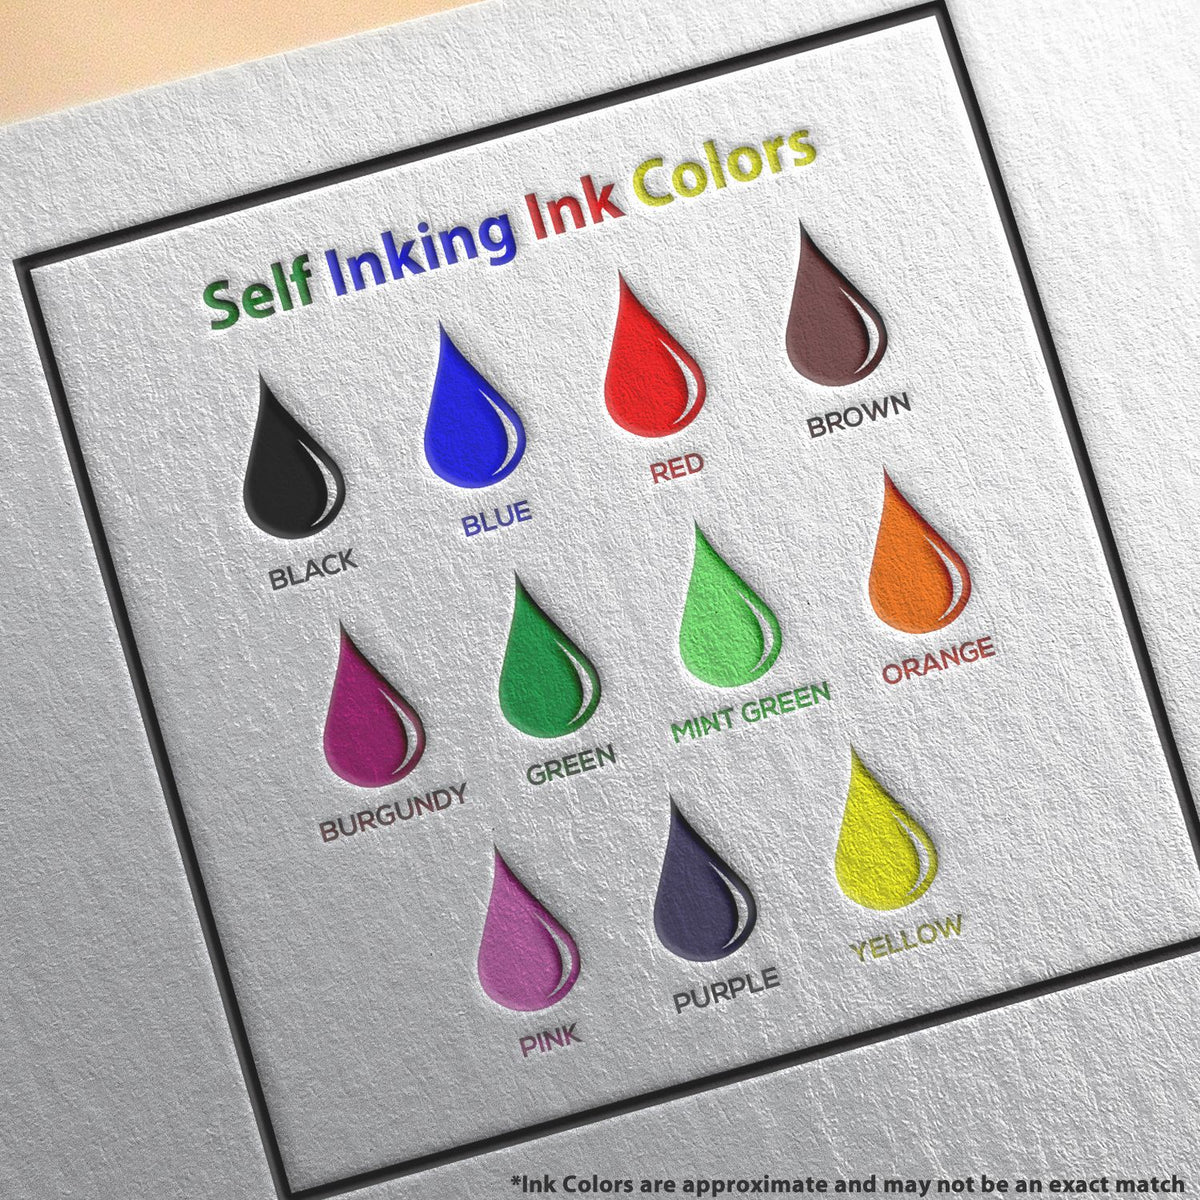 A picture showing the different ink colors or hues available for the Self-Inking Rectangular Indiana Notary Stamp product.